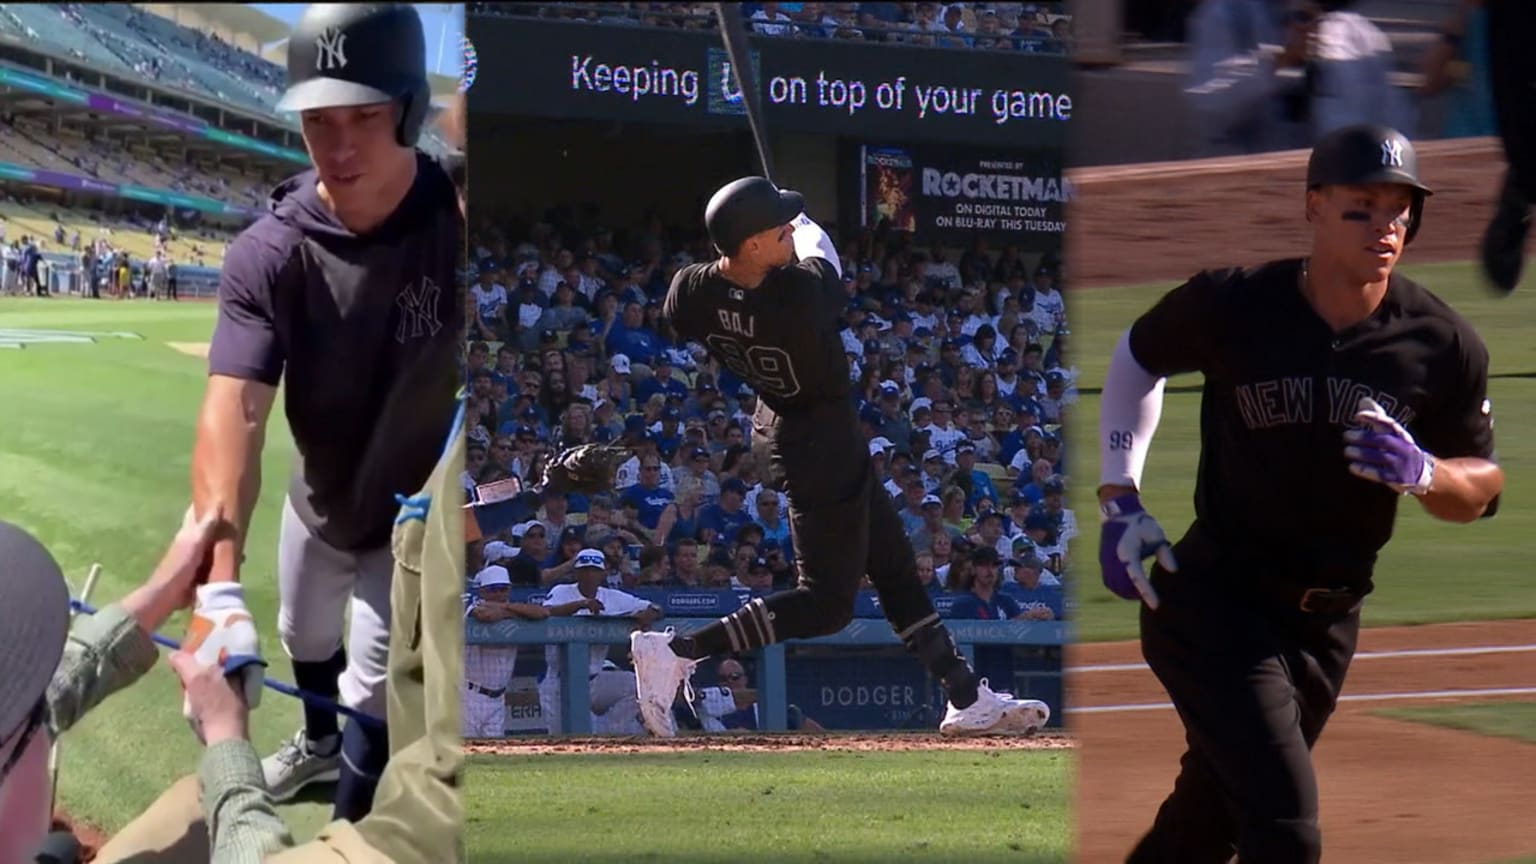 Yankees star Aaron Judge delivers on promise with home run vs. Dodgers